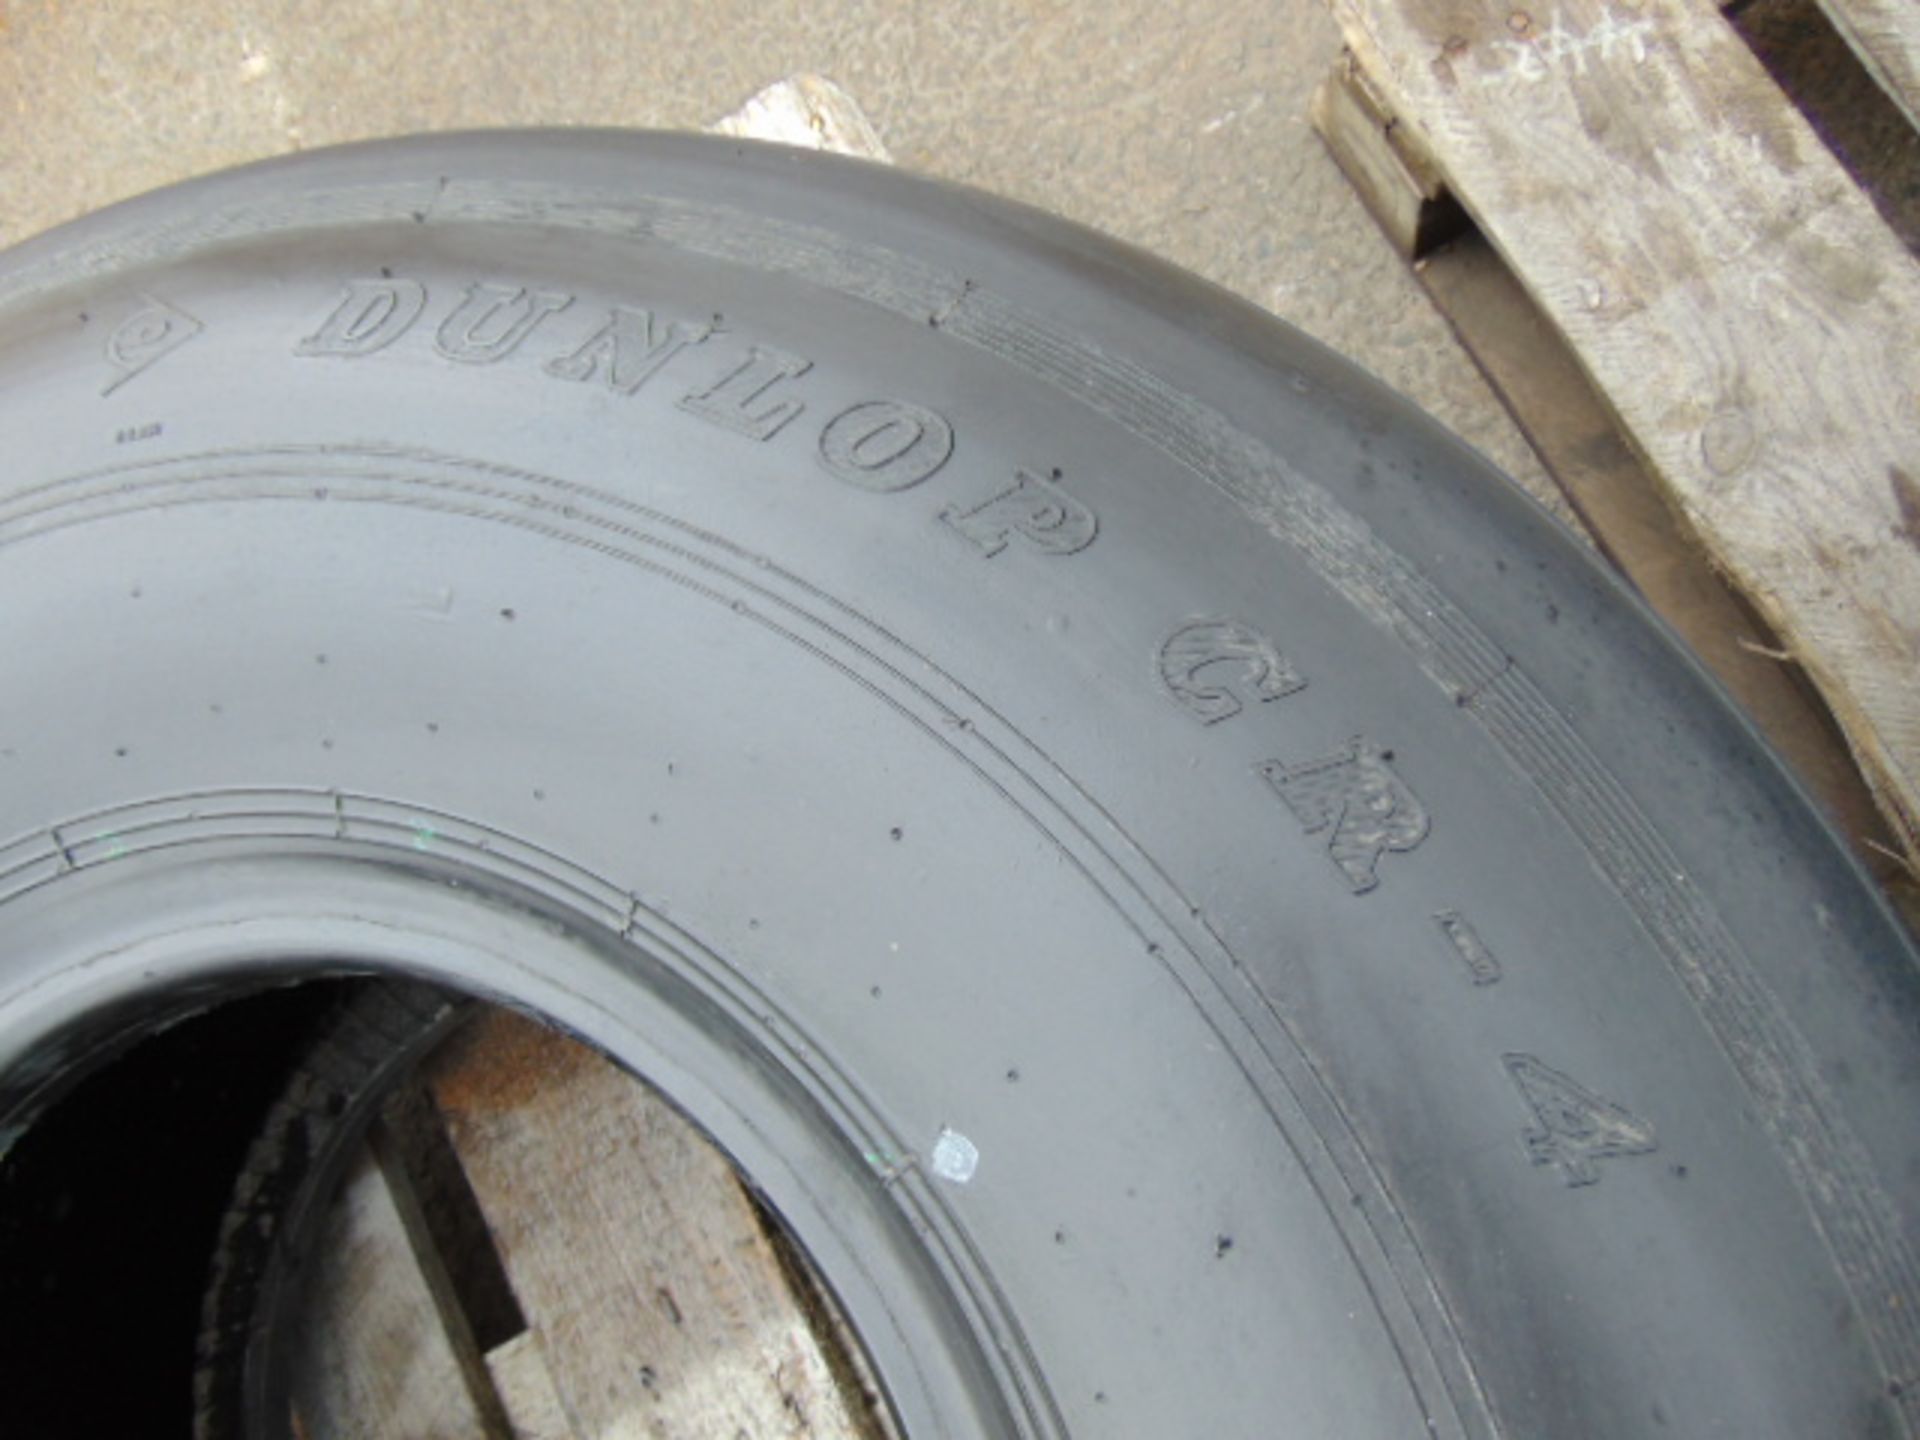 Dunlop CR-4 VC10 Aircraft Tyre - Image 3 of 5